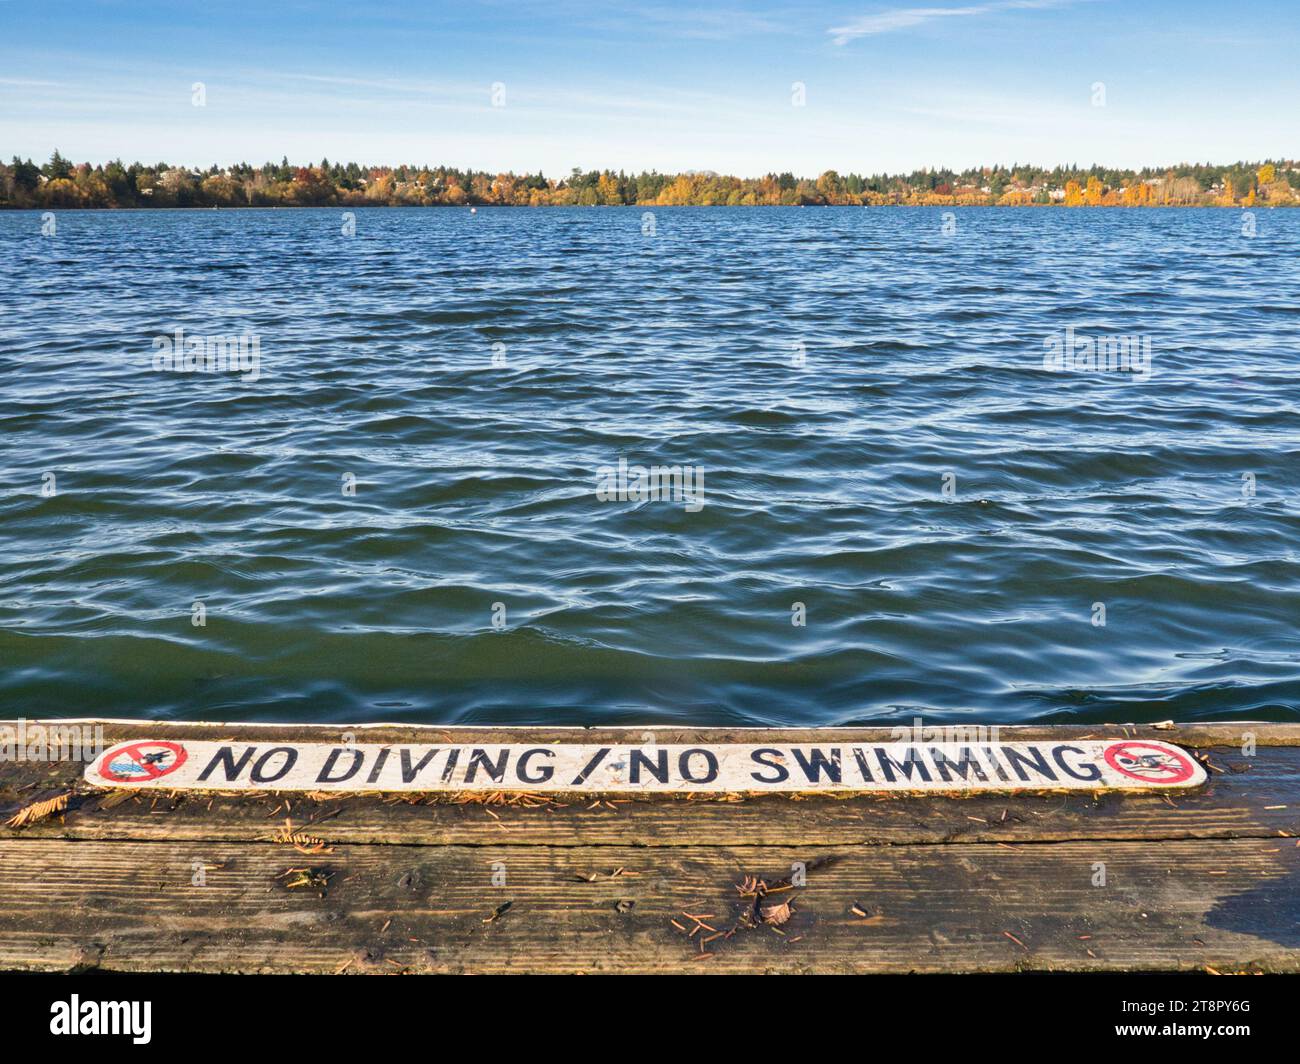 'NO DIVING / NO SWIMMING' sign at end of wooden lake dock in city park with beautiful fall foliage in the distance. Gentle ripples on the lake. Stock Photo